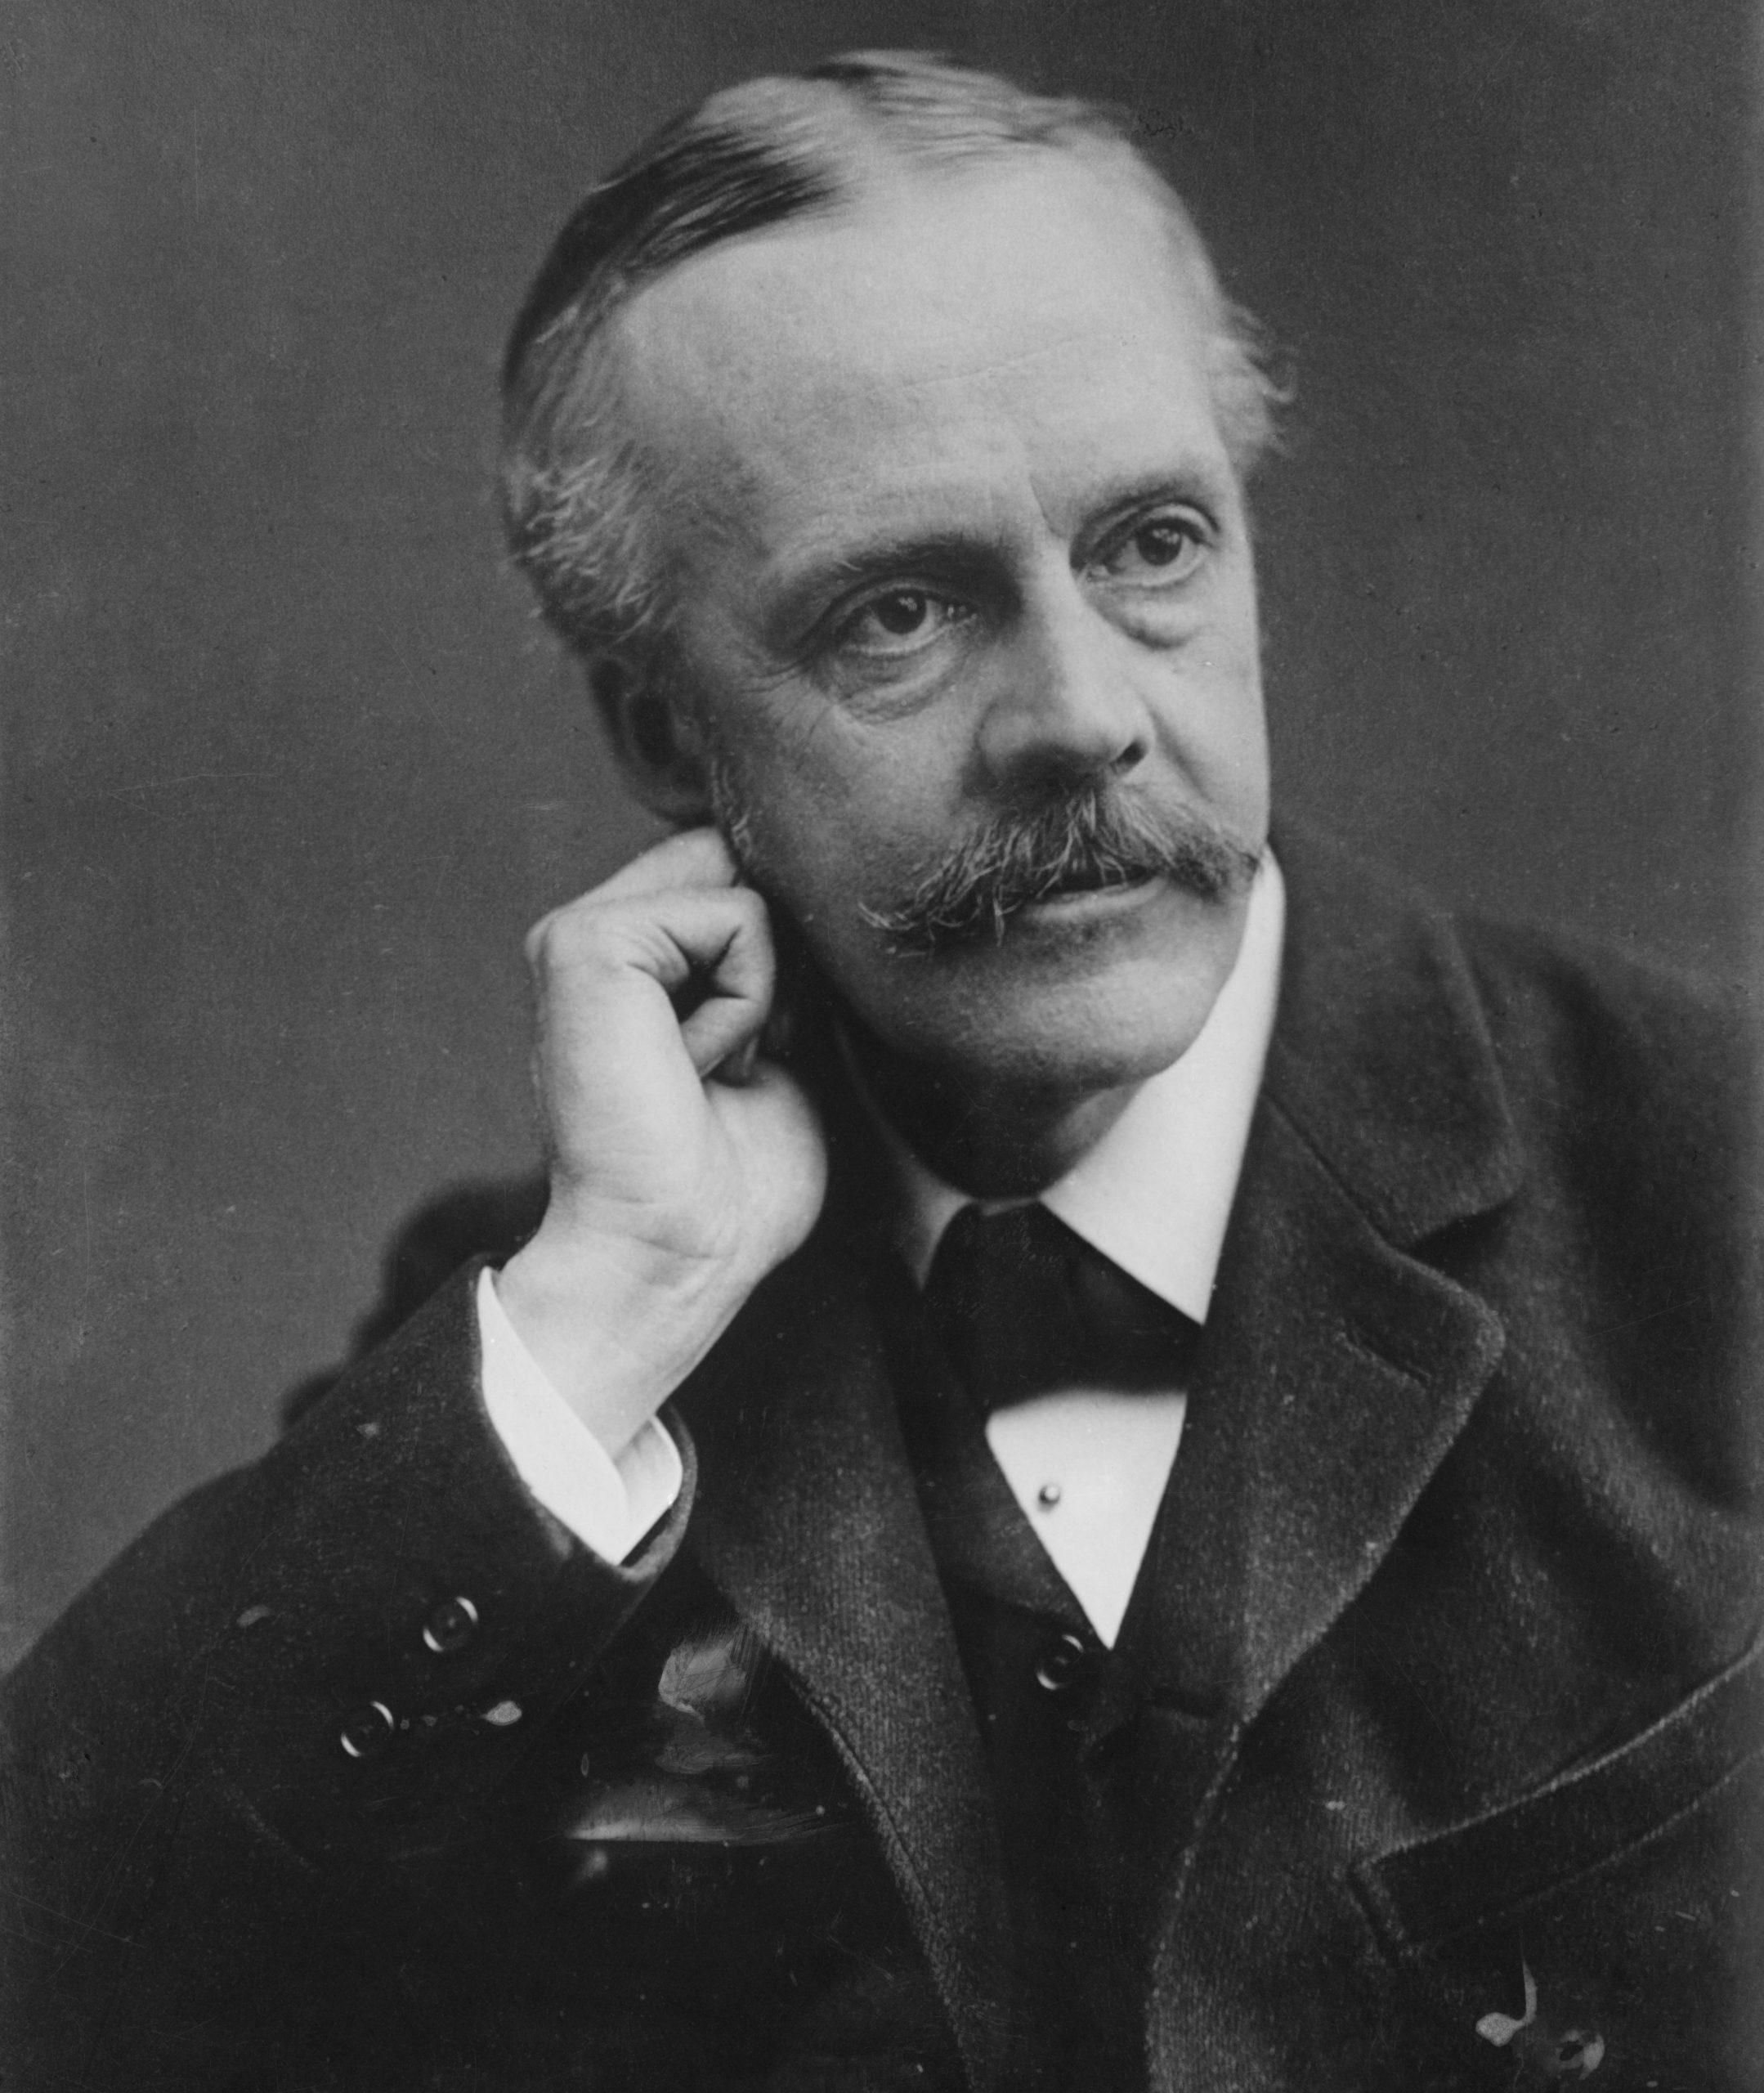 Lord Arthur Balfour’s Speech, July 12, 1920, Excerpt from Palestine Royal Commission Report (Peel Commission) (Cmd. 5479) – July 1937.